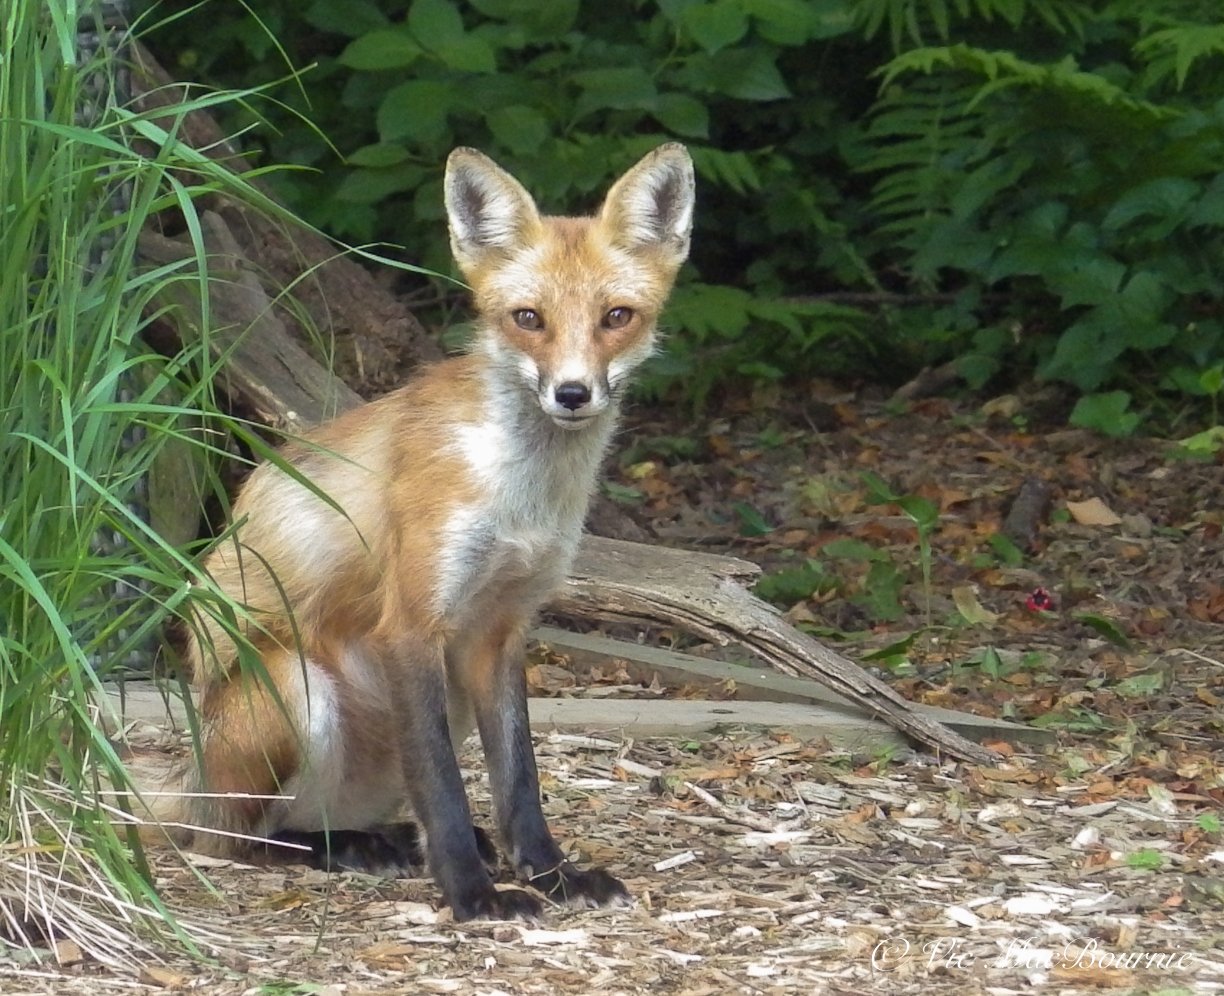 A young fox poses in the garden when I reached for the Pentax "Bridge" camera, the impressive X5.